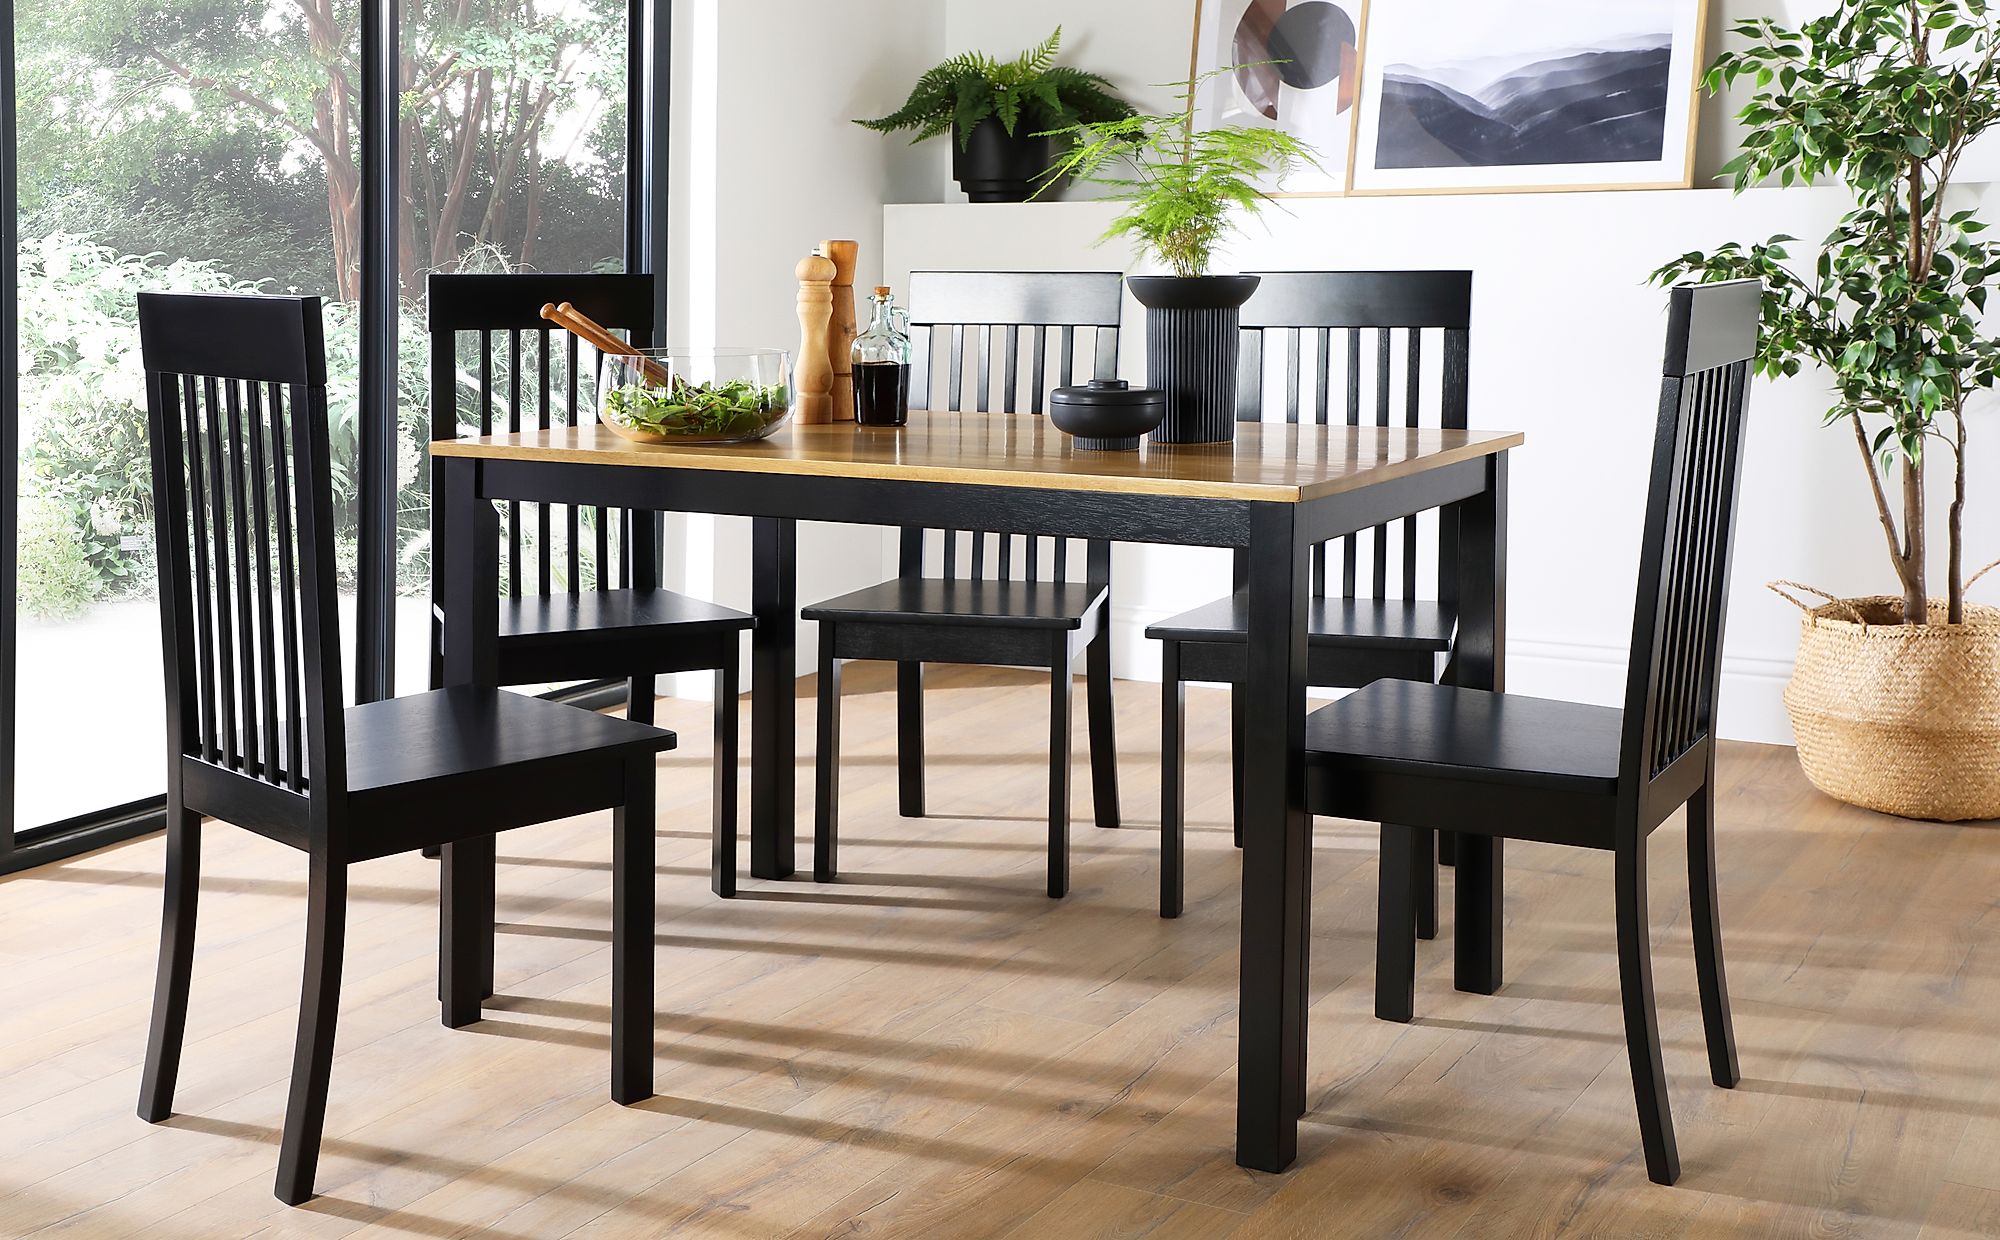 Milton Painted Black and Oak Dining Table with 6 Oxford Black Chairs